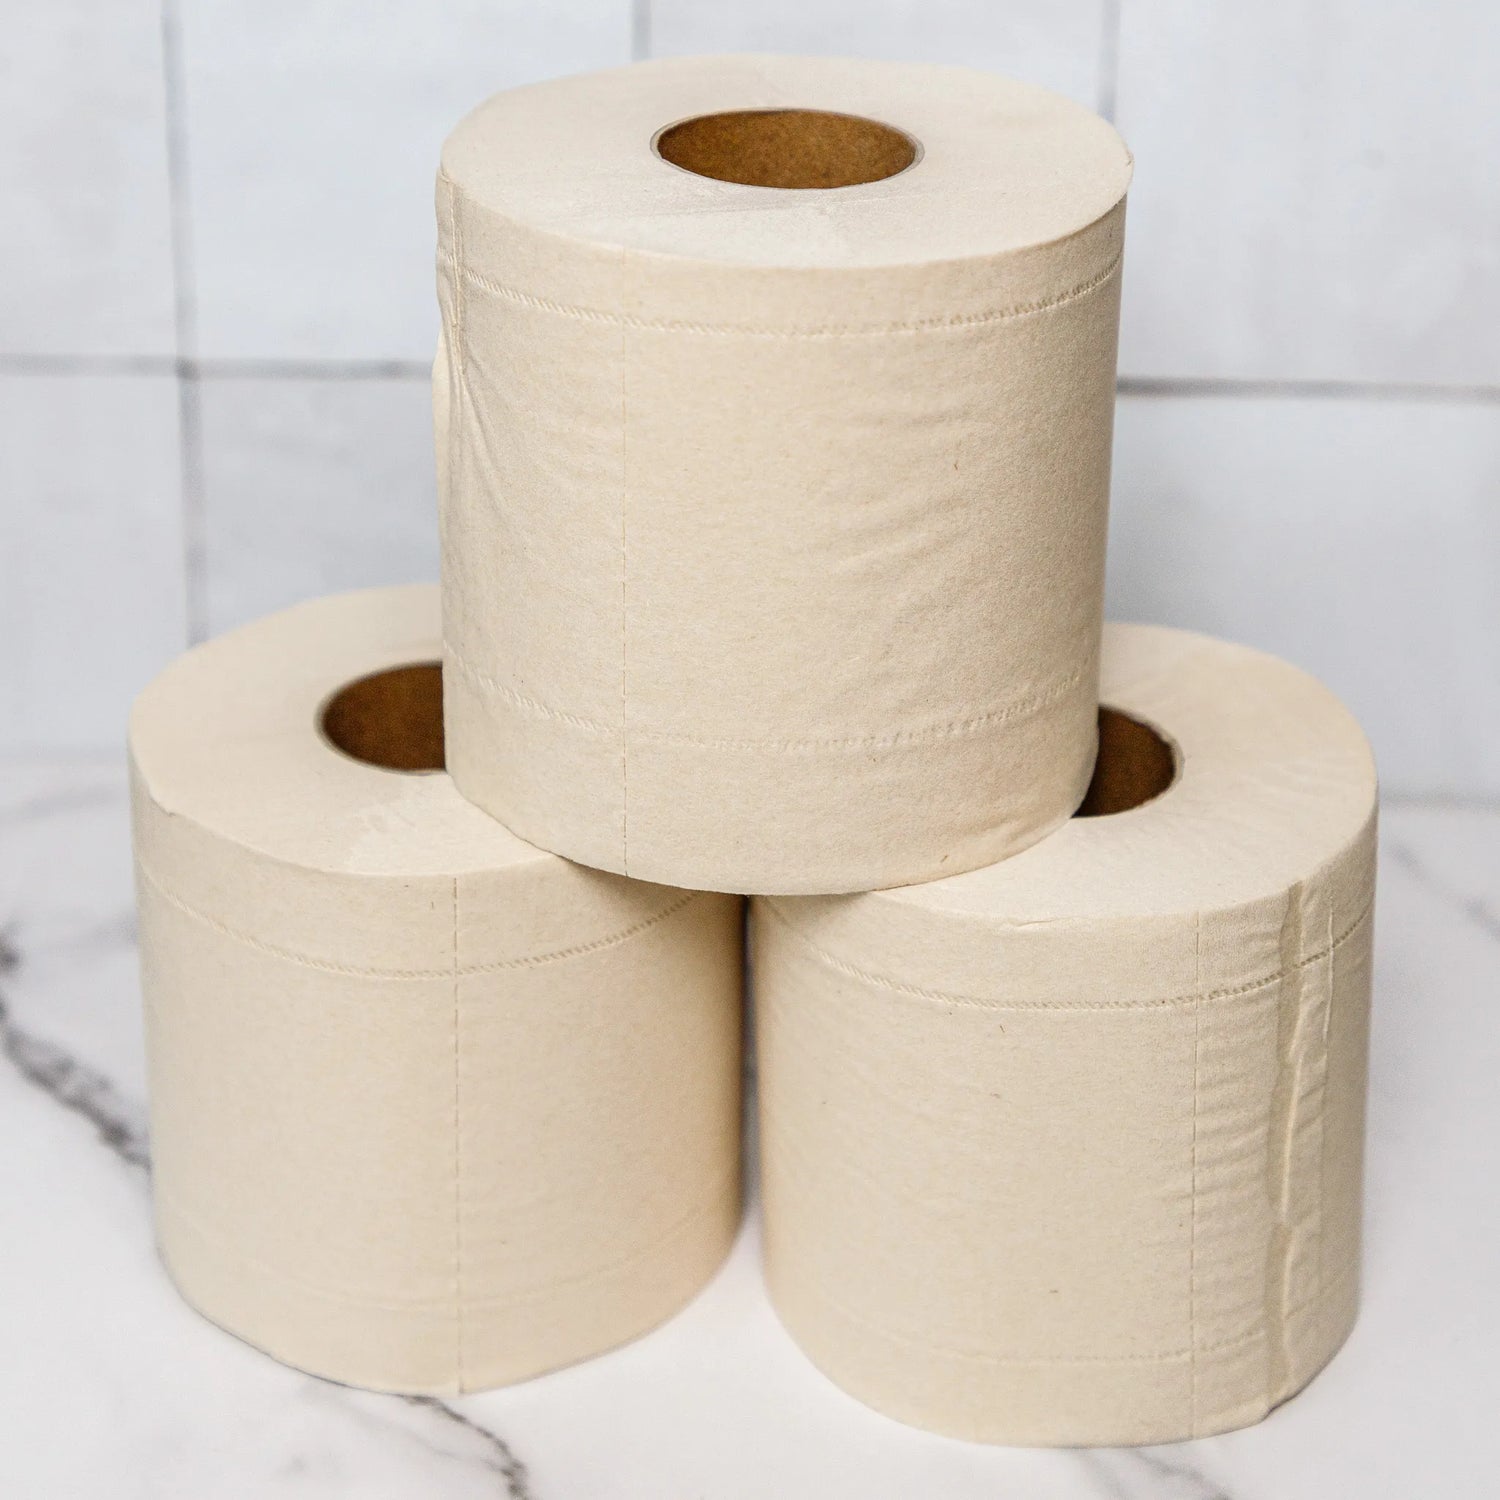 Eco-Friendly Toilet Paper: Bamboo vs. Recycled